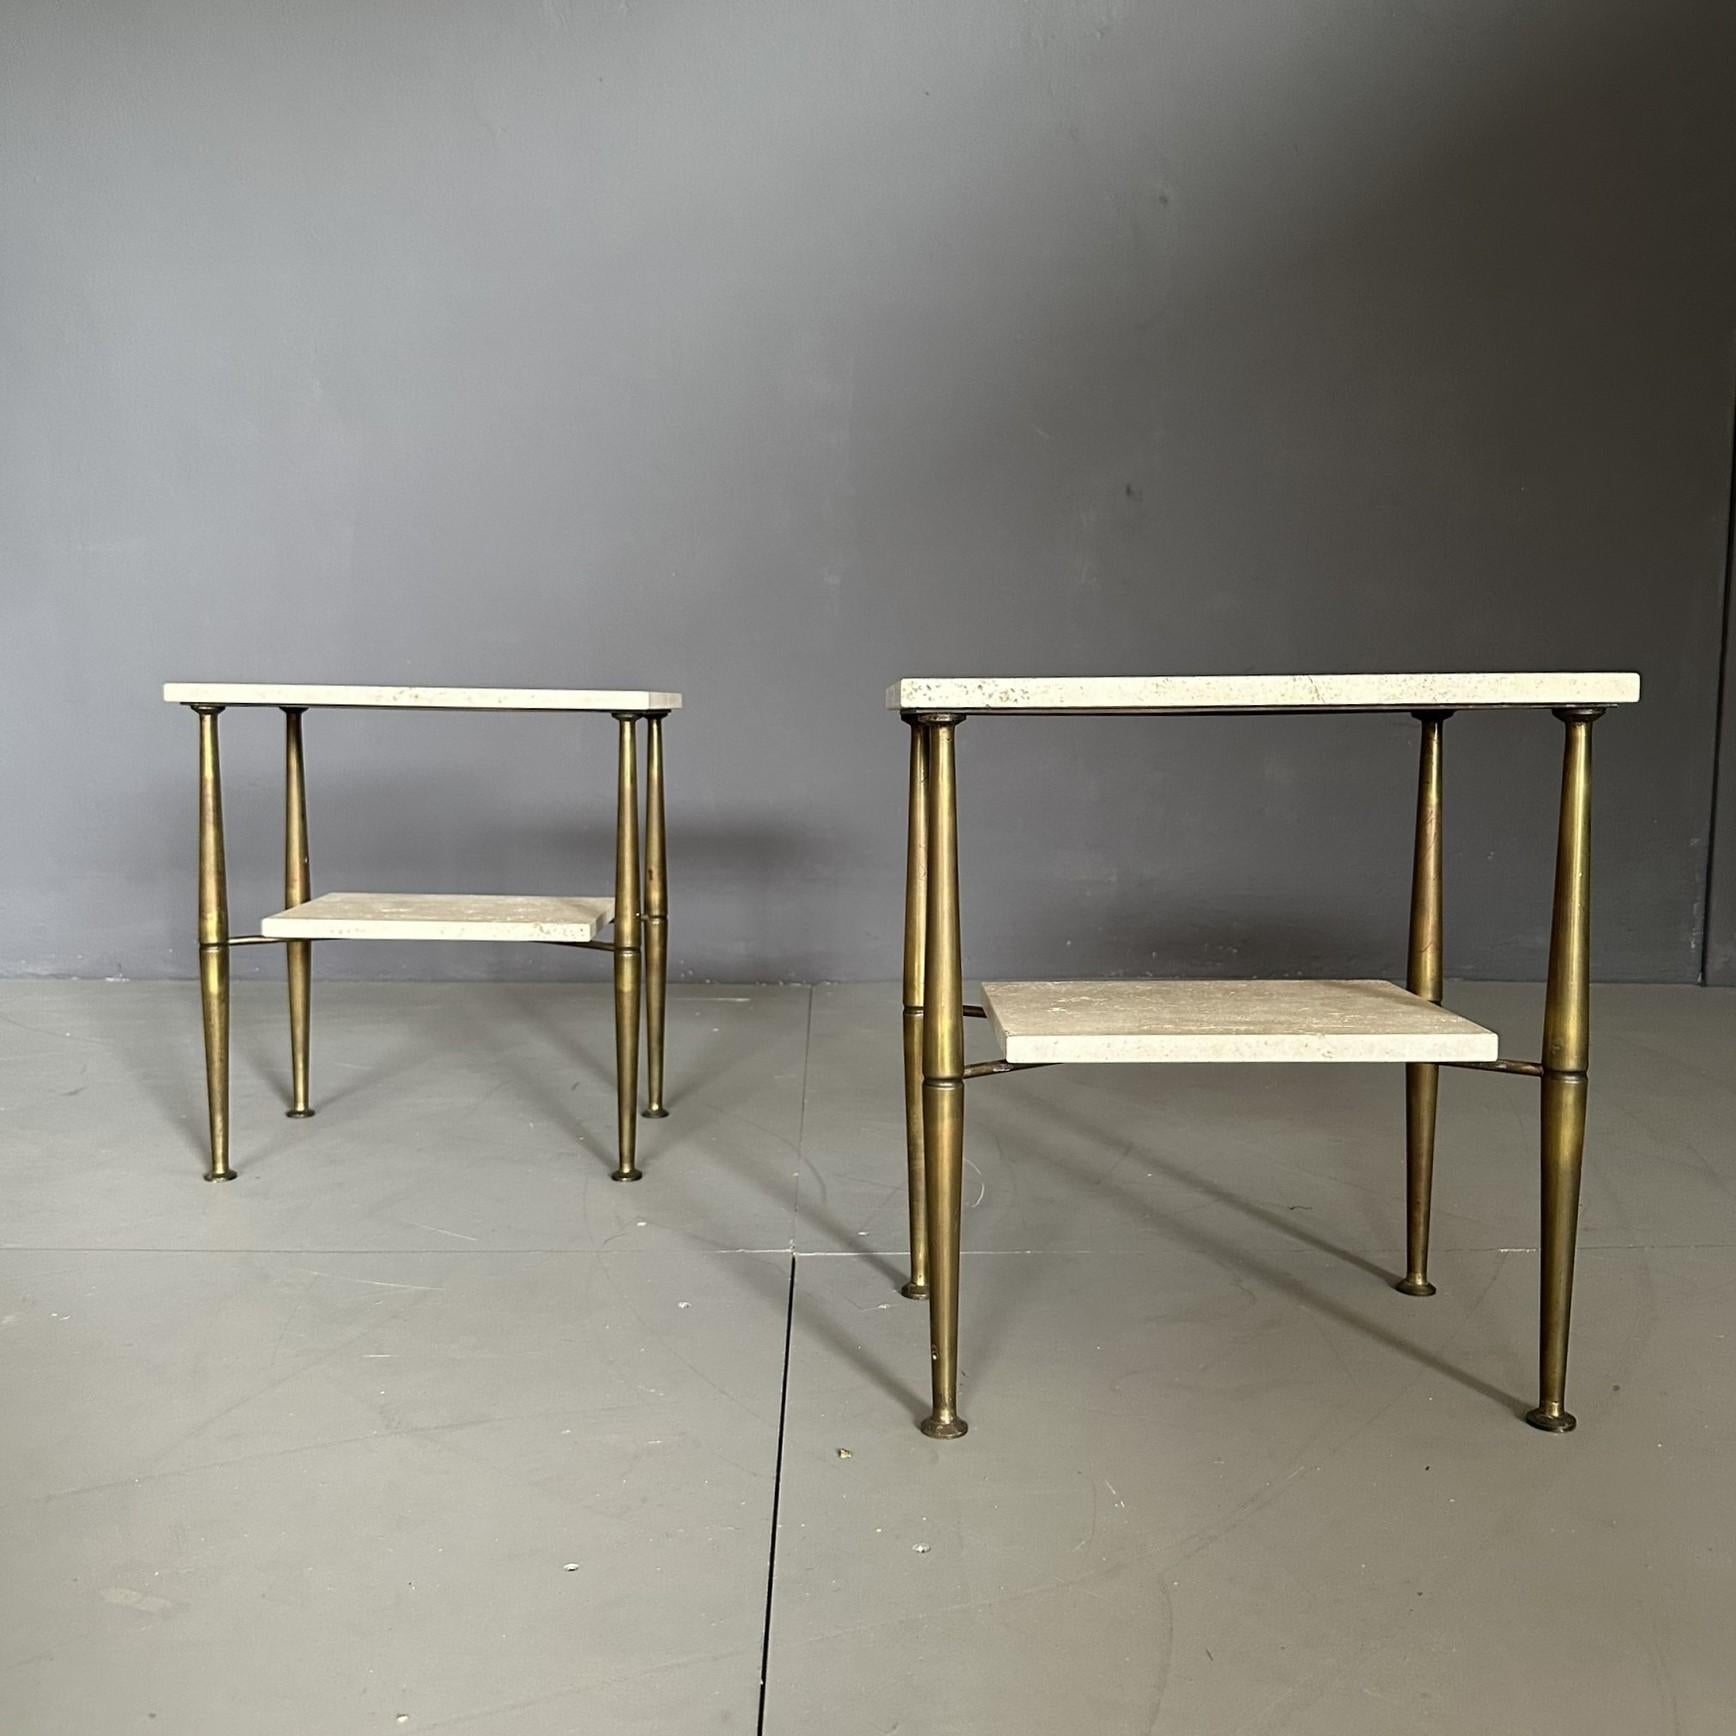 Pair of seventies bedside tables, Italian manufacture.
The bedside tables have a brass structure with travertine marble tops.
Given their shape they can also be used as coffee tables.
Two item availables.